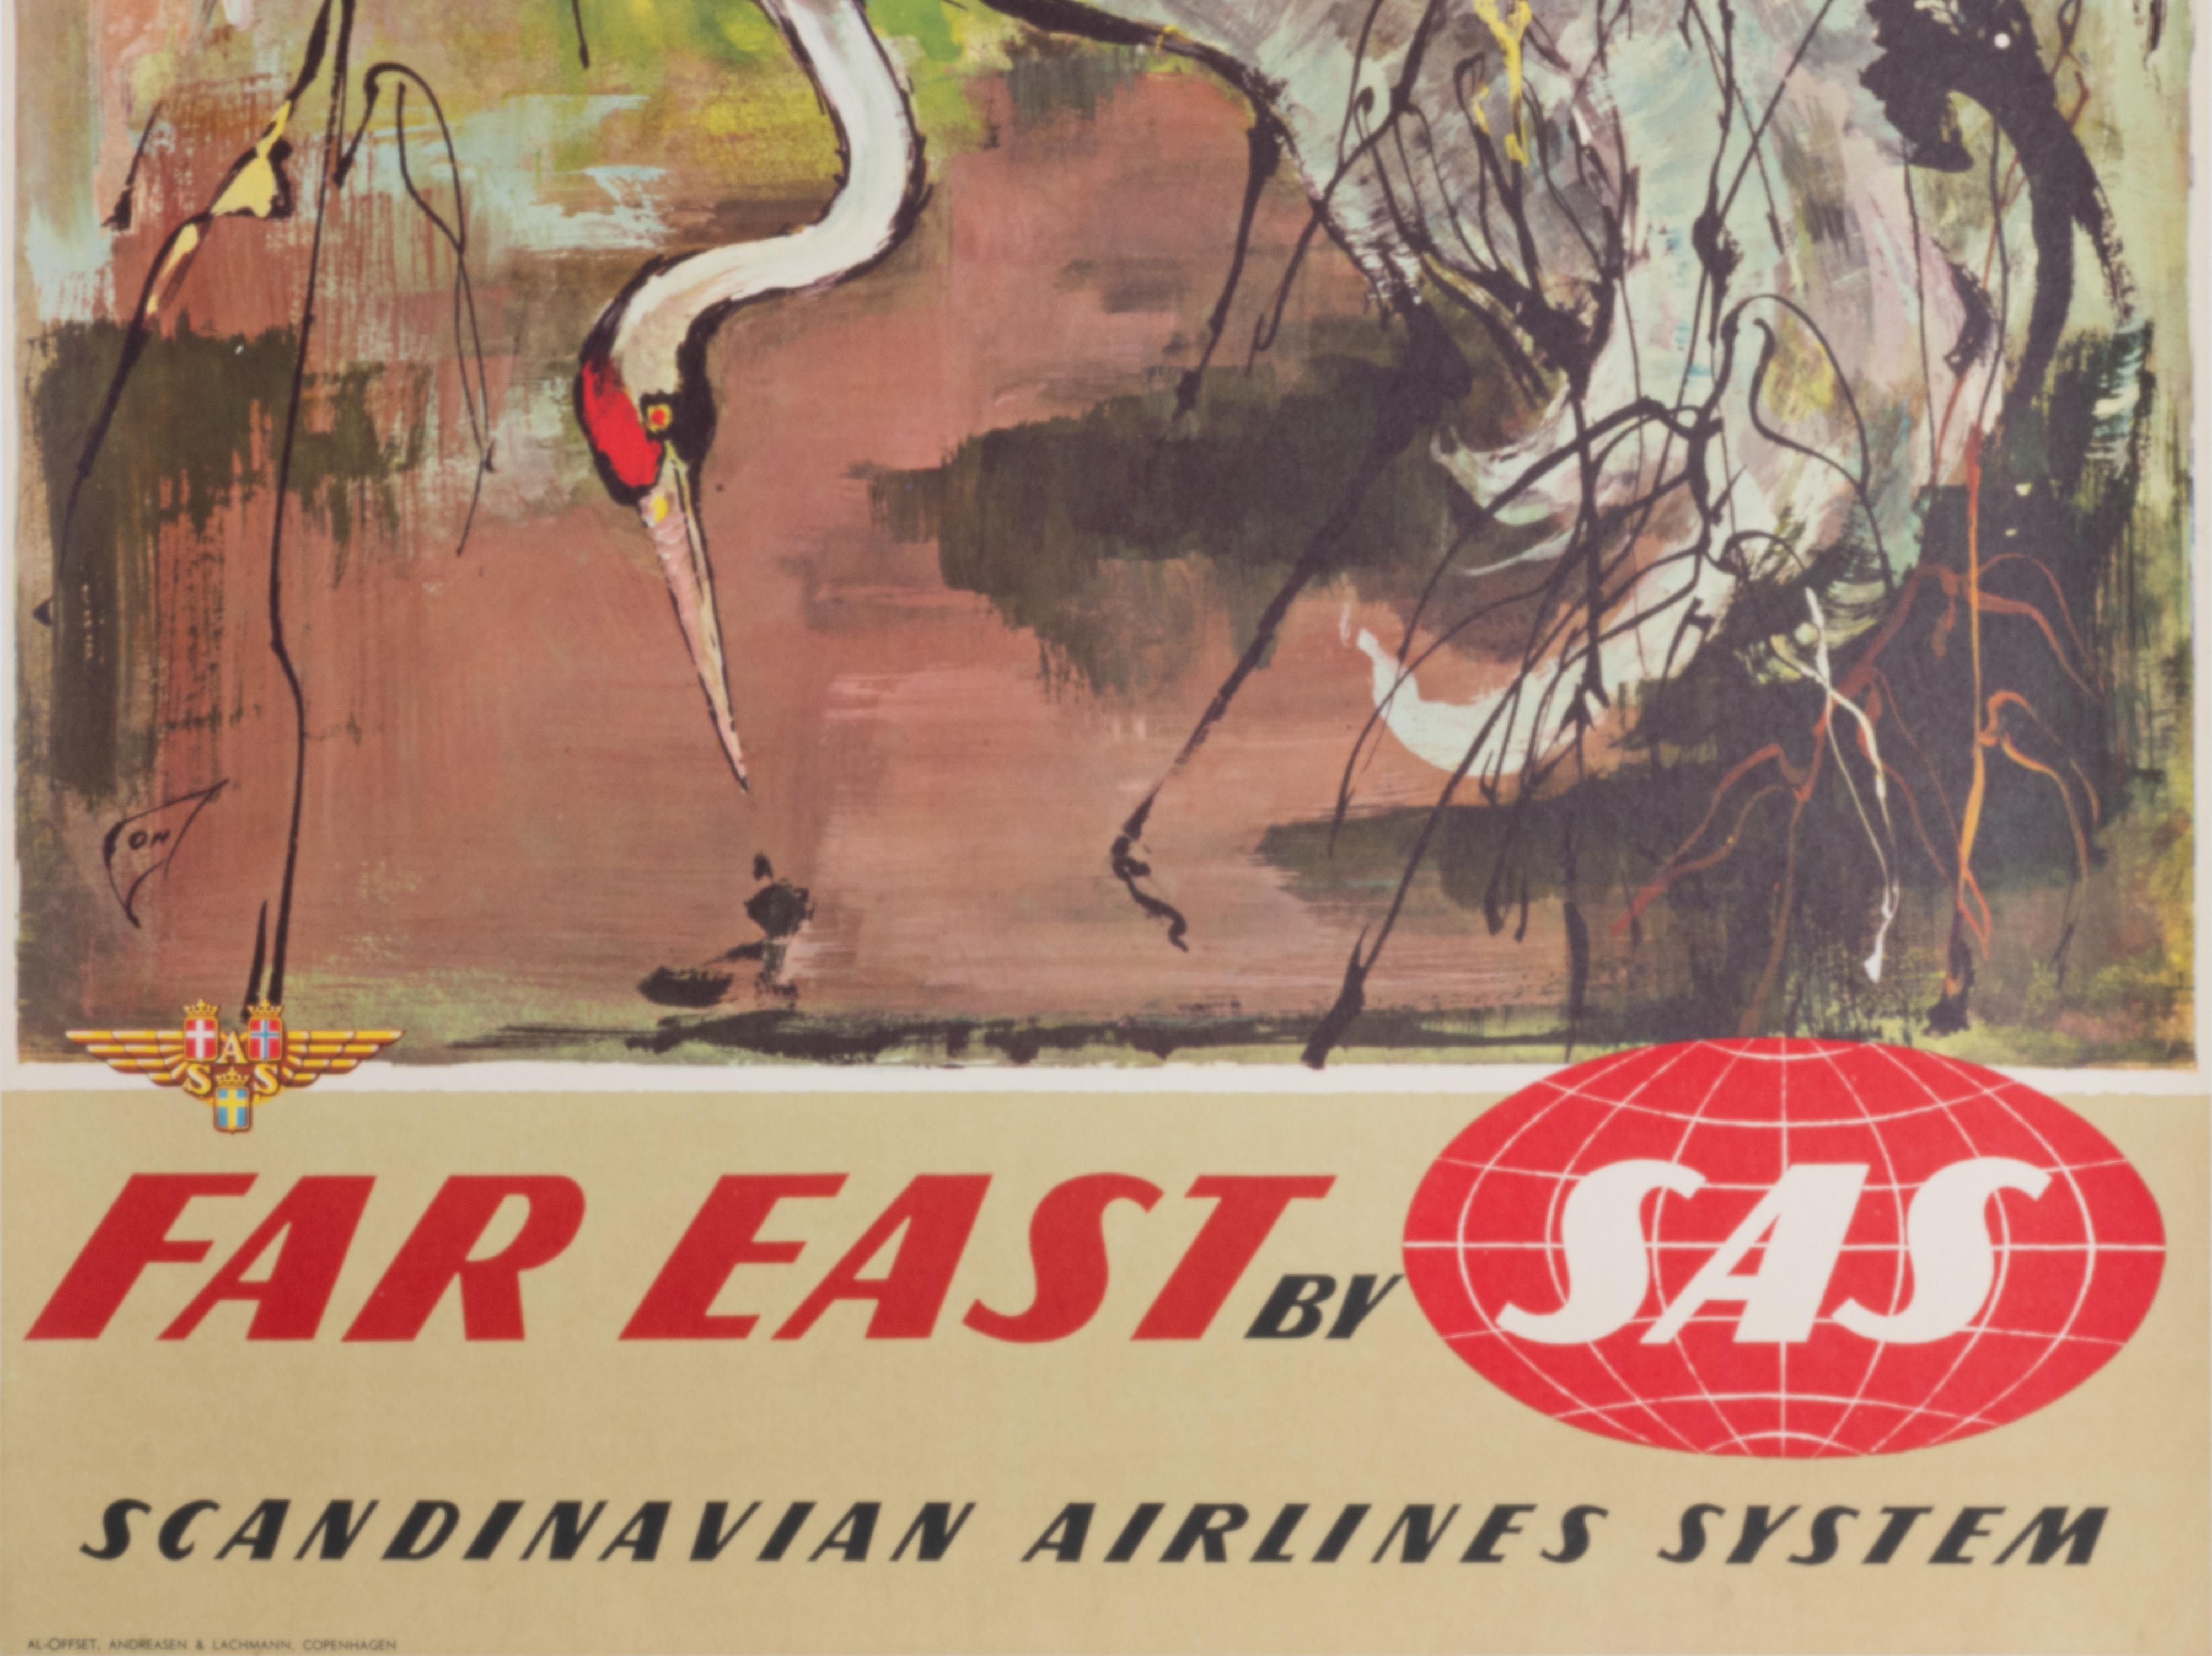 Scandinavian advertising poster for SAS to promote tourism in the Far East.

Artist: Otto Nielsen (1916 - 2000)
Title: Far East by SAS
Date: 1960
Size (w x h): 24.8 x 39.2 in / 63 x 99.6 cm
Printer: Al-Offset, Andreasen ans Lachmann,